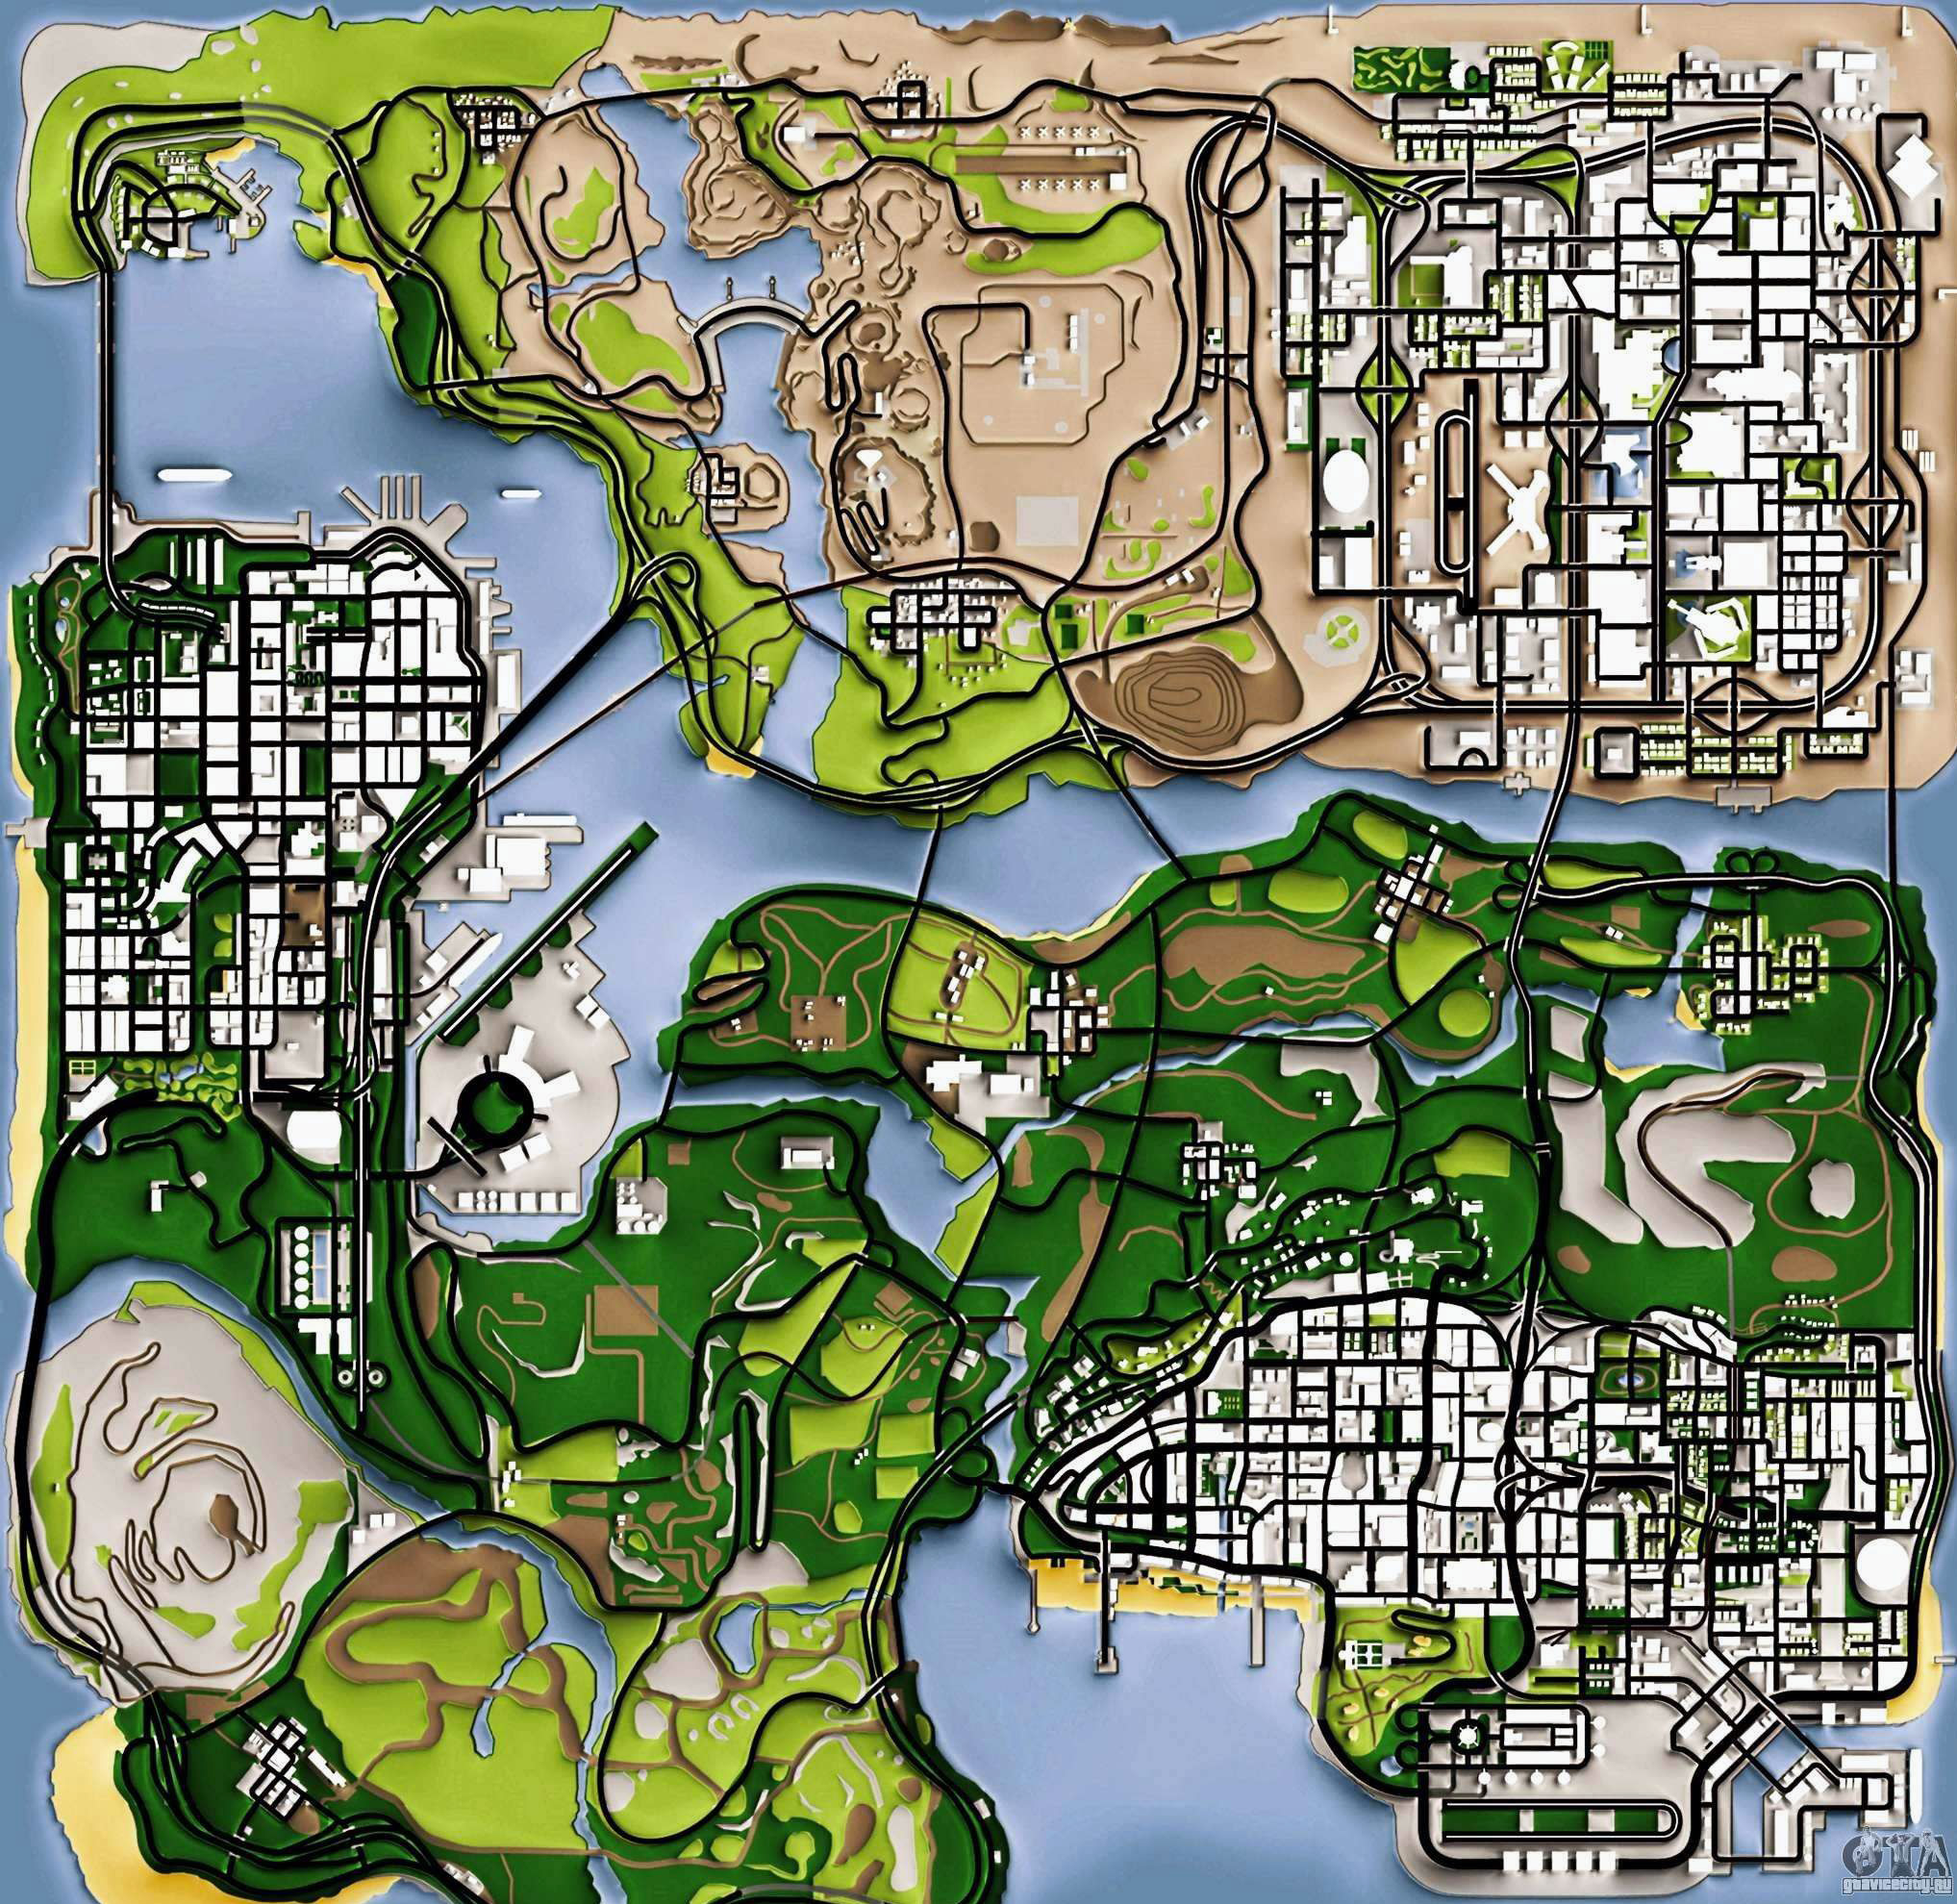 large-detailed-road-map-of-gta-san-andreas-games-mapsland-maps-of